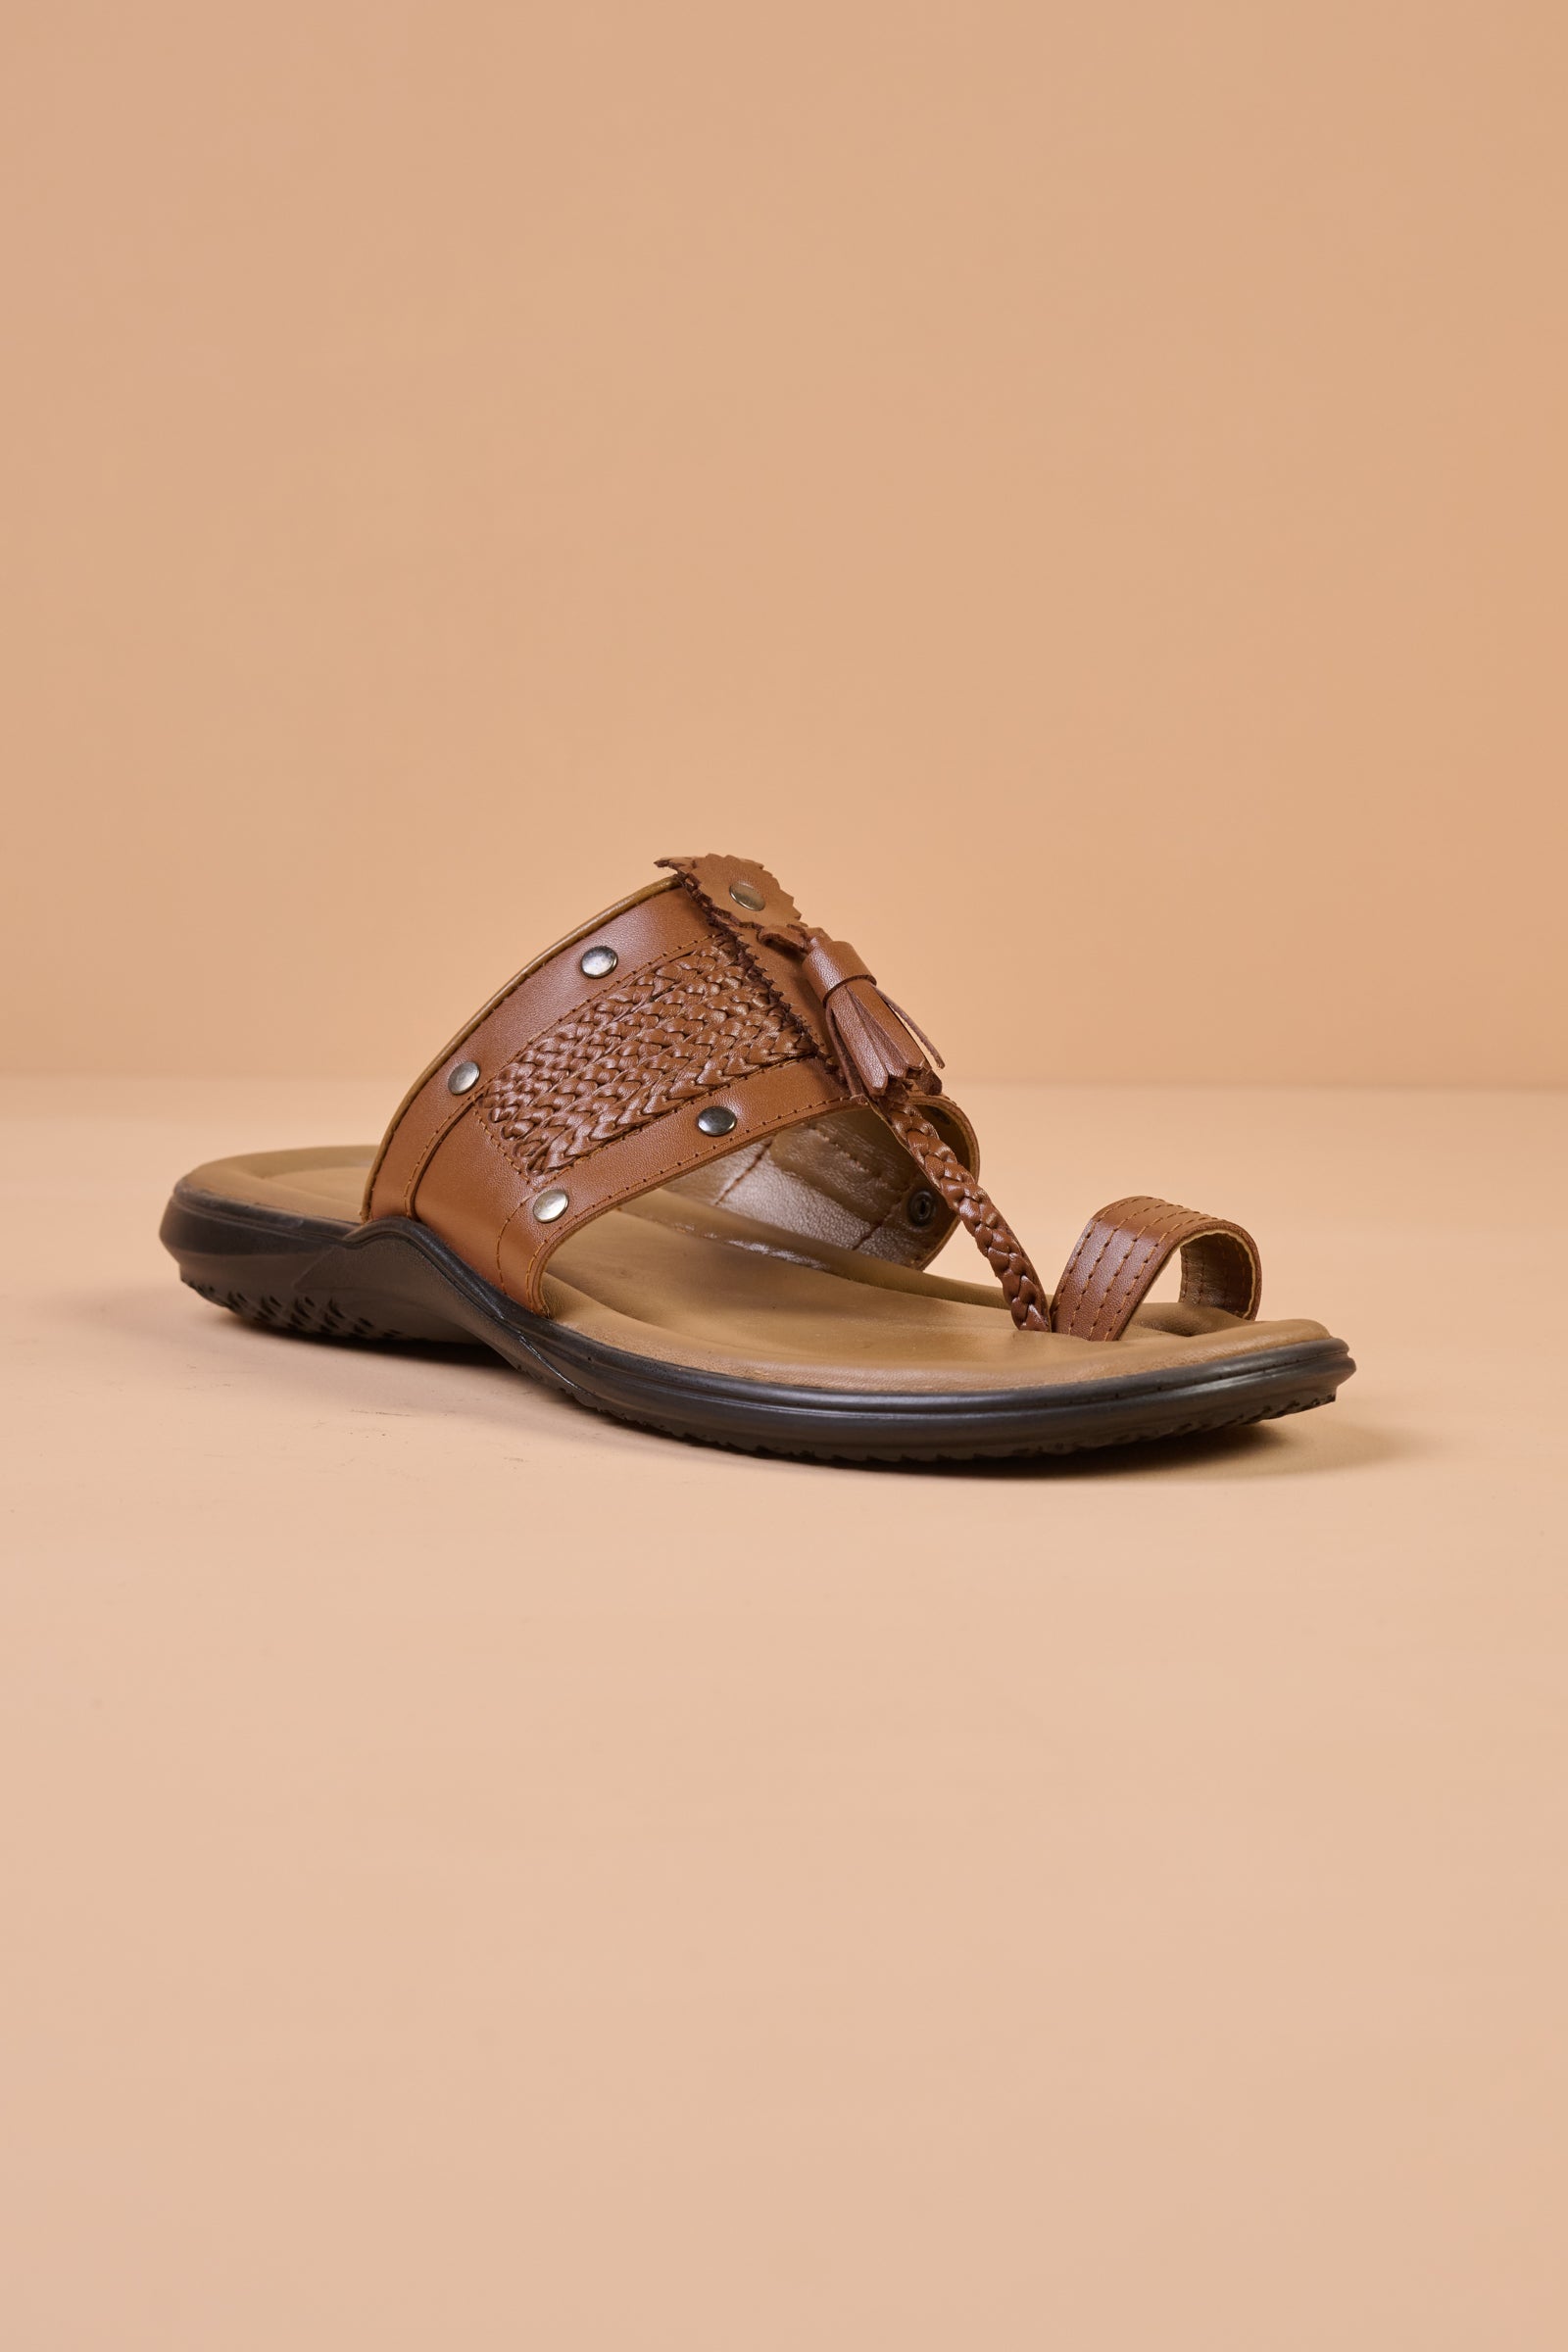 Leather Sandal With Woven Strap